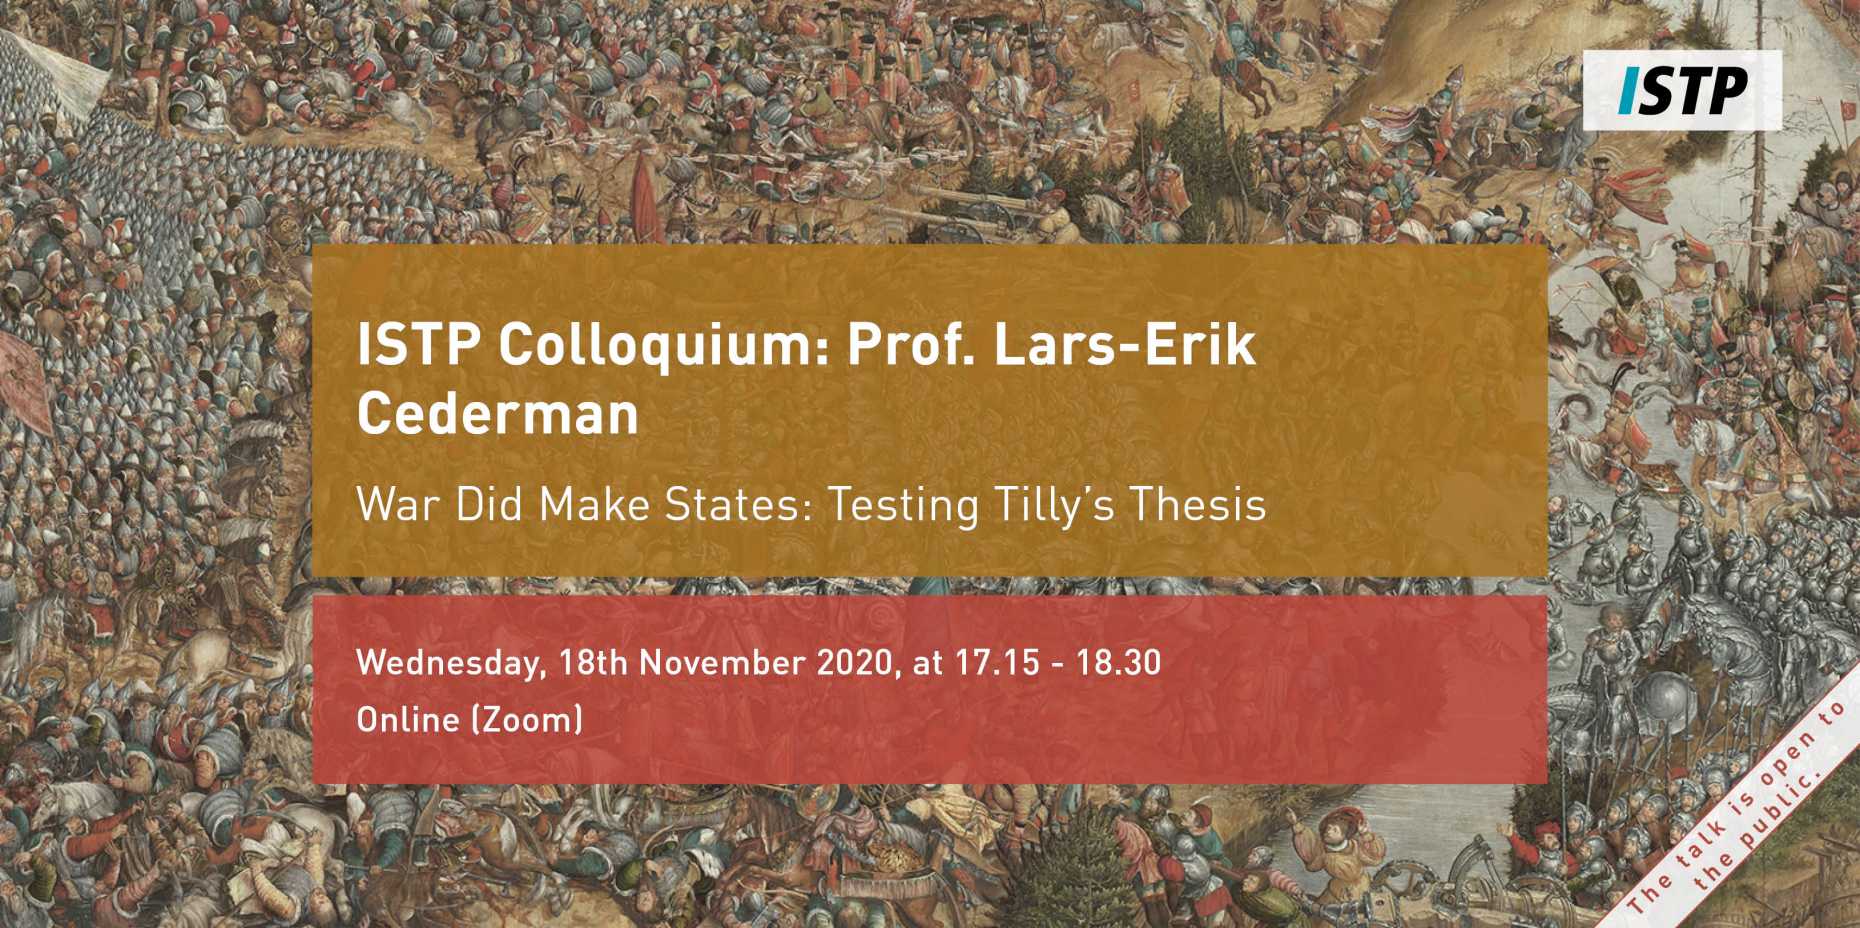 ISTP Colloquium: War Did Make States - Testing Tilly’s Thesis